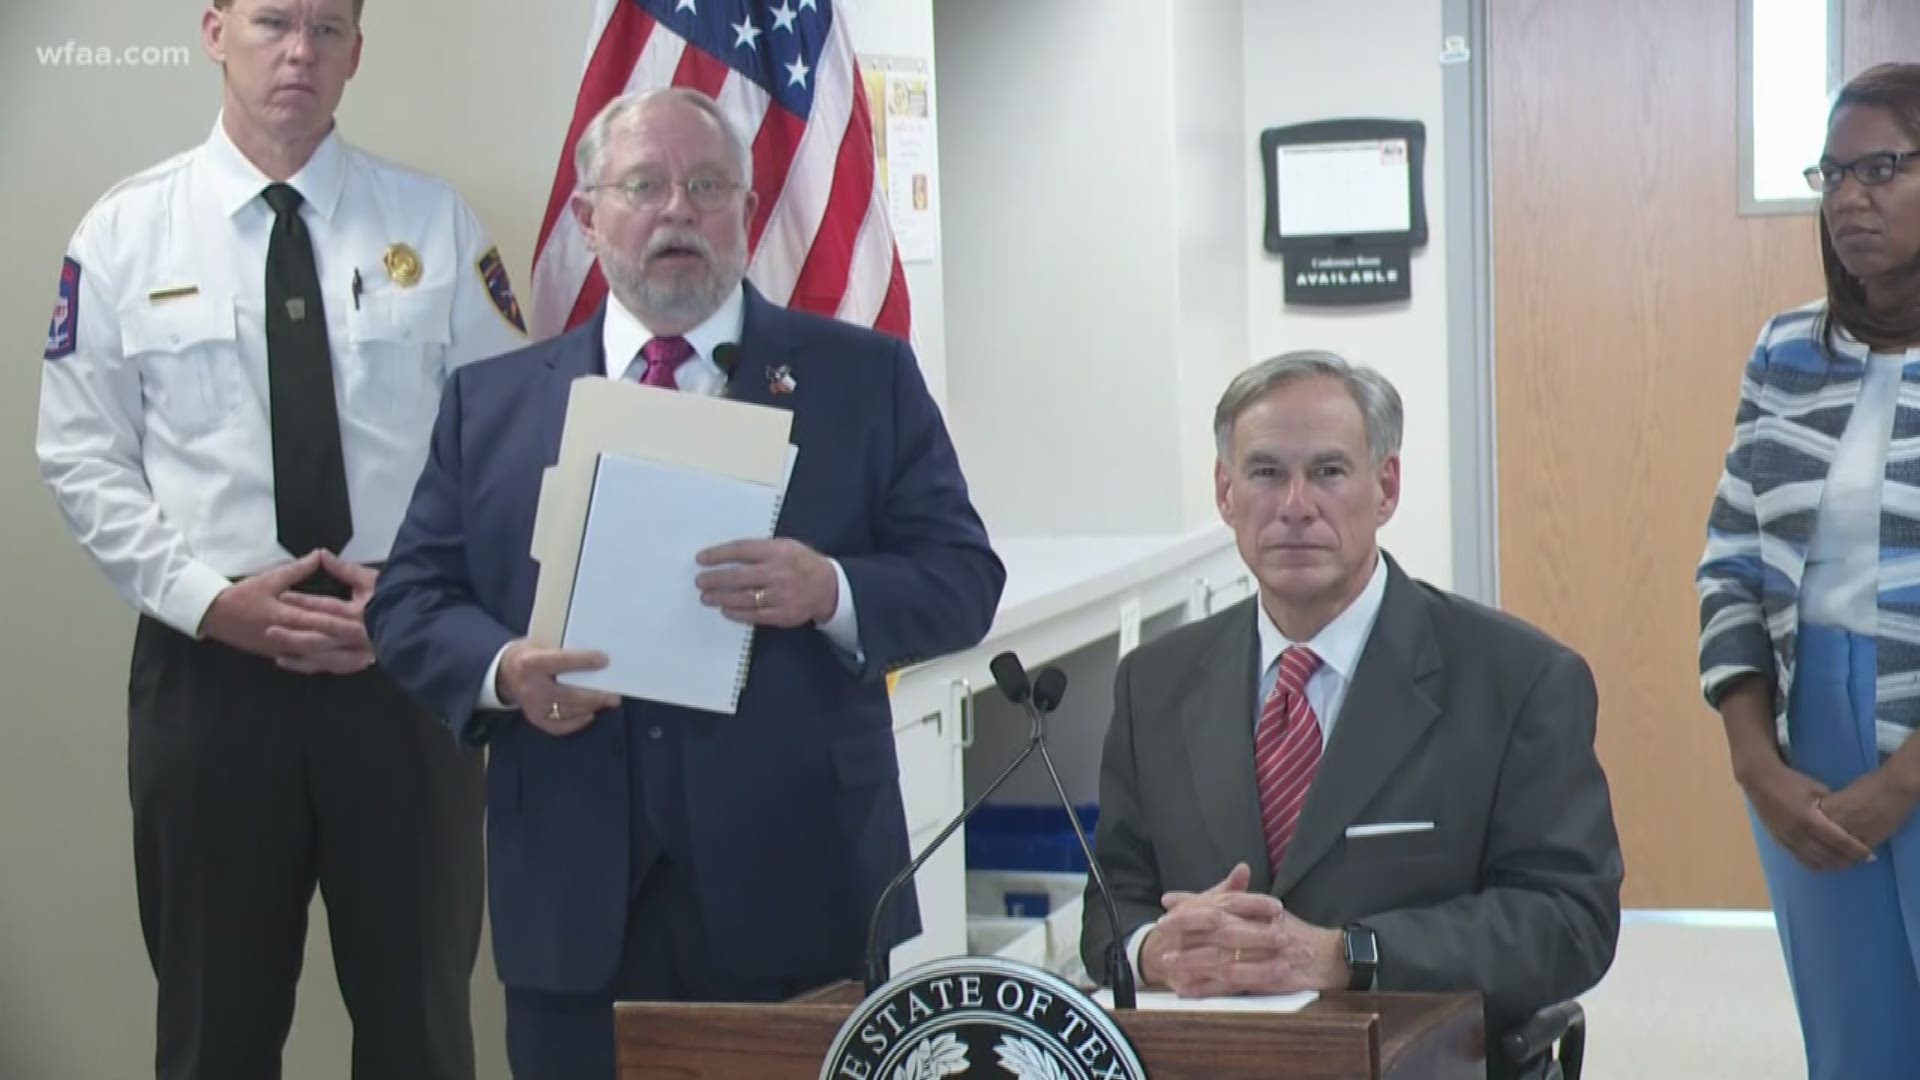 “First good news is that Texas now has the ability to test for COVID-19," Governor Abbott said.